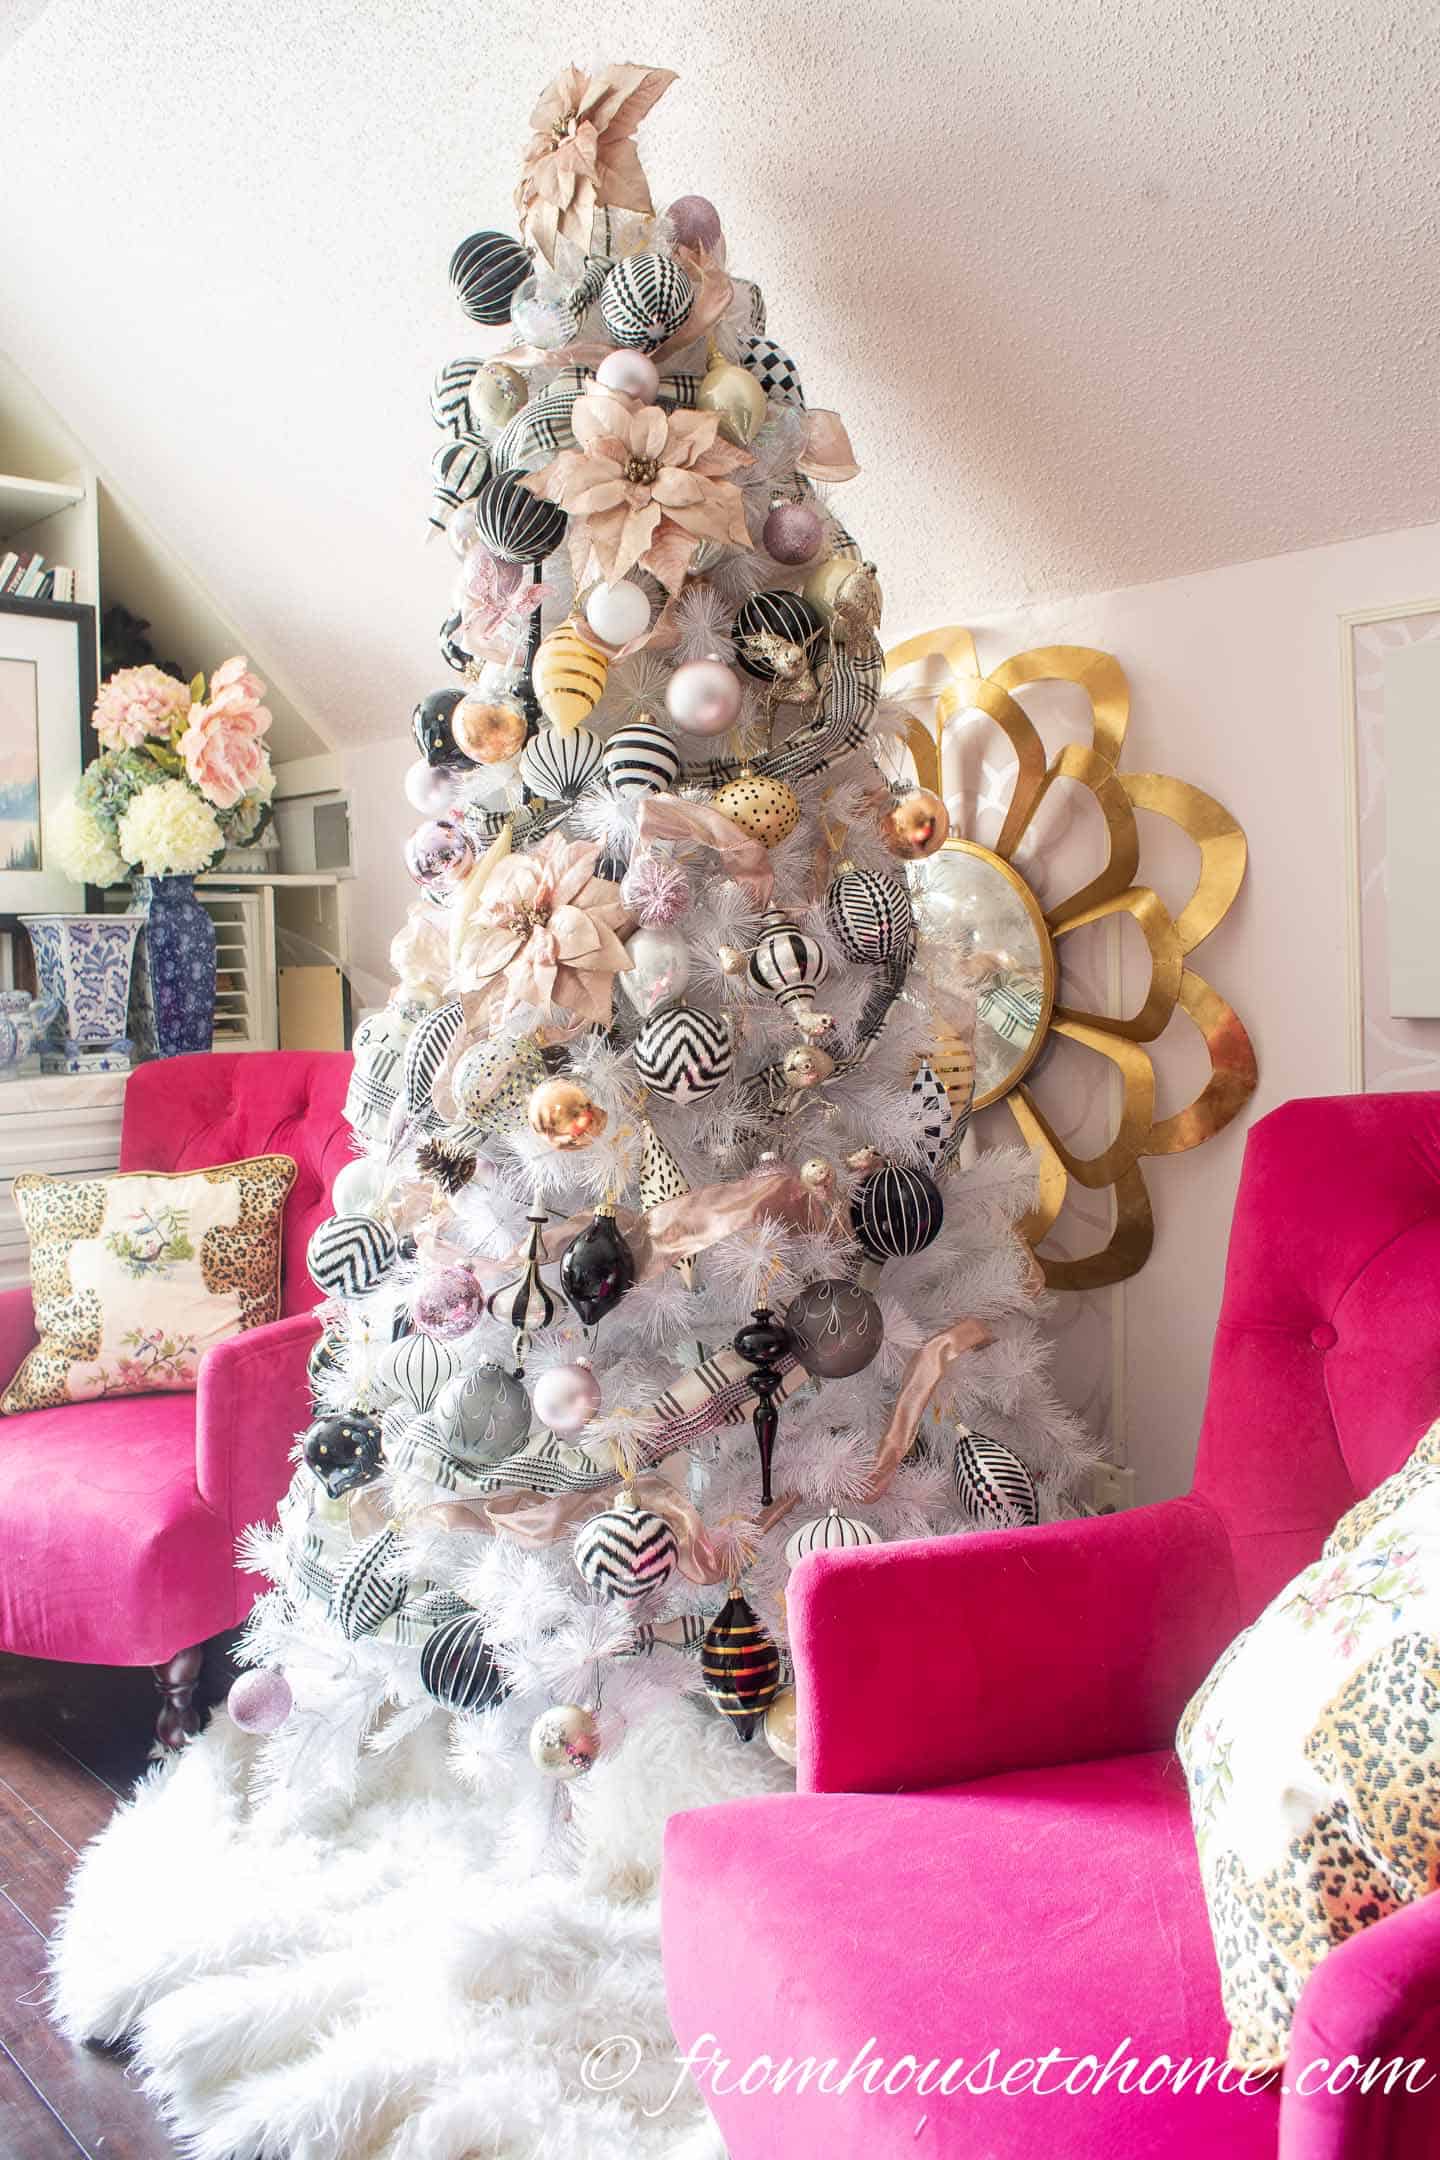 Blush pink, white and black ornaments on a white Christmas tree